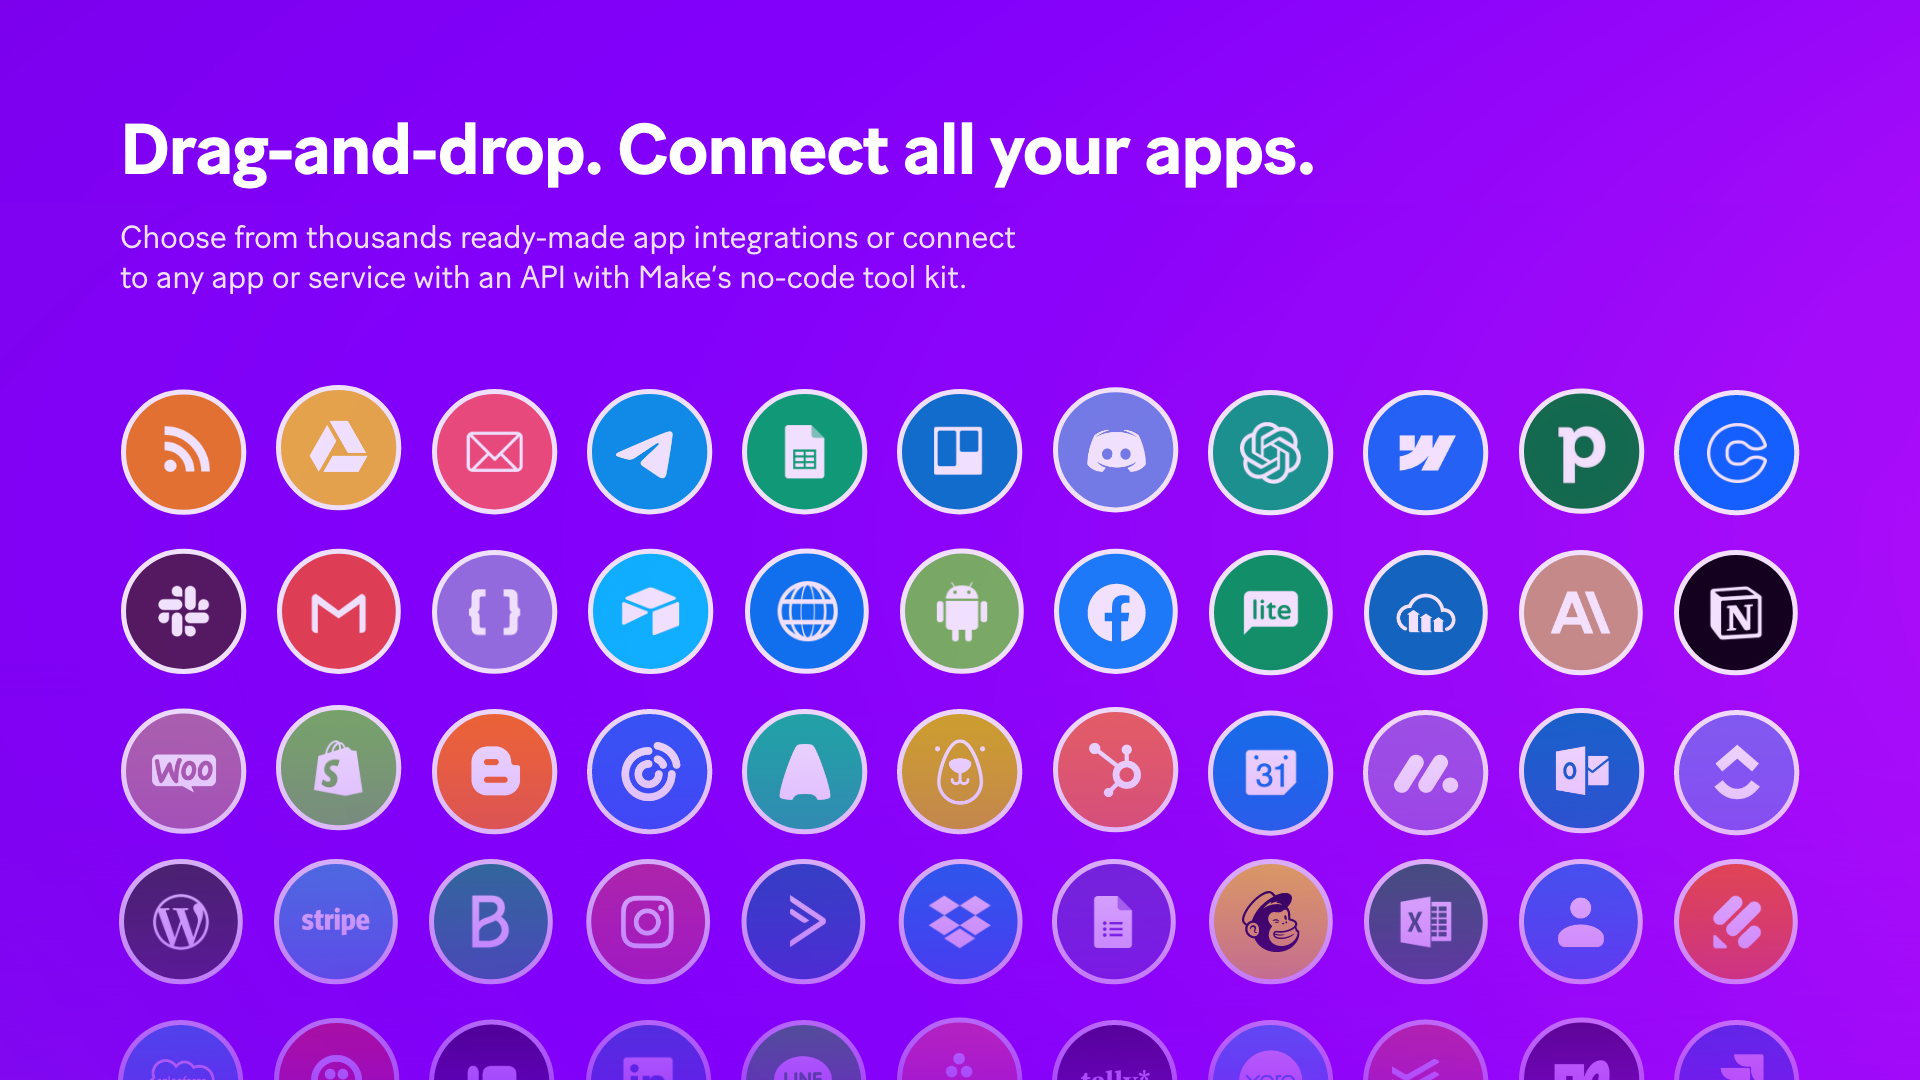 Connect Make apps with VBOUT